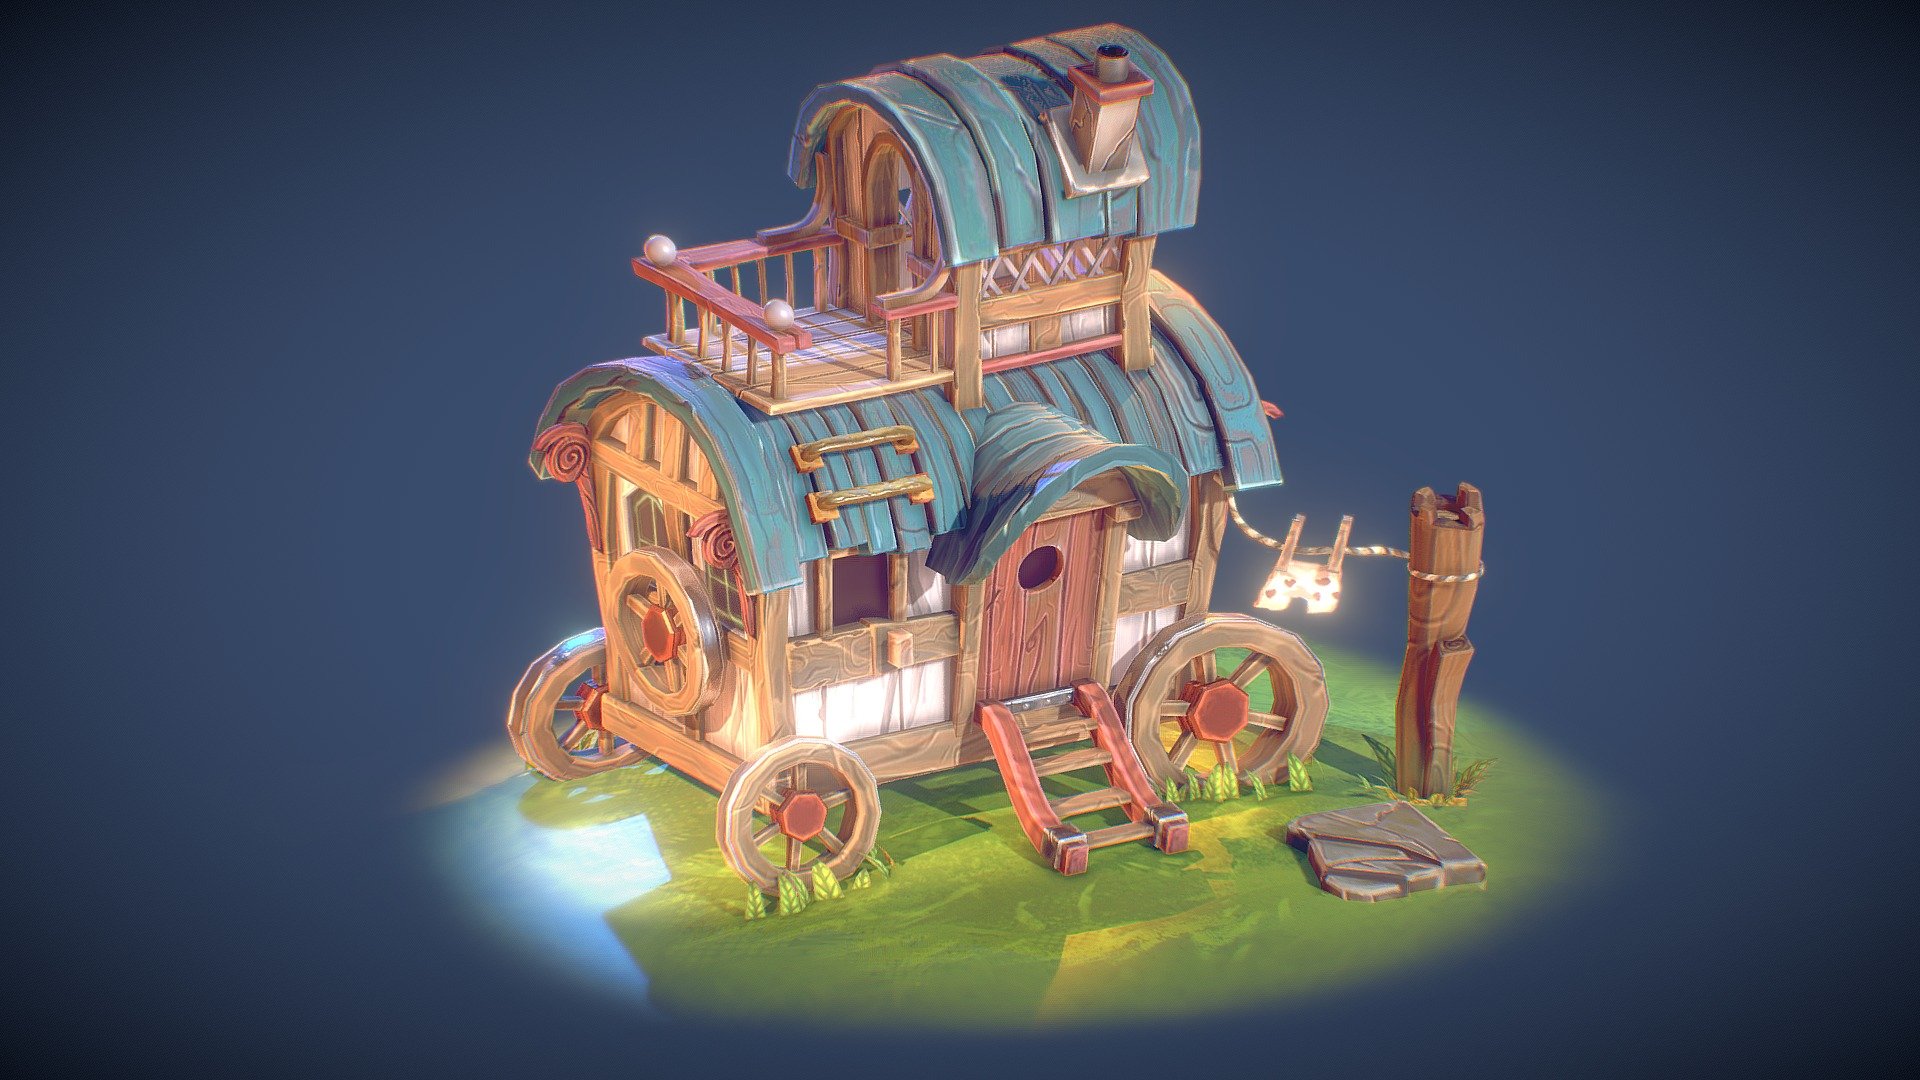 This is a diorama inspired by one of Florian Dreyer's concepts I found on Artstation called &lsquo;Candy Farm Building'. I loved the colours and textures from the concept and really enjoyed creating it in 3D. I'm really enjoying creating these small diorama's with handpainted textures so I'm sure there will be more coming soon. I used Maya for the modelling and Substance and Photoshop for texturing. I also created a small scene in UE4 which you can see on my Artstation post (link below).

I hope you like it :)

Concept - https://www.artstation.com/artwork/kmAx2

https://www.artstation.com/artwork/q9nyvP - Travellers Caravan - 3D model by andrewmelfi 3d model